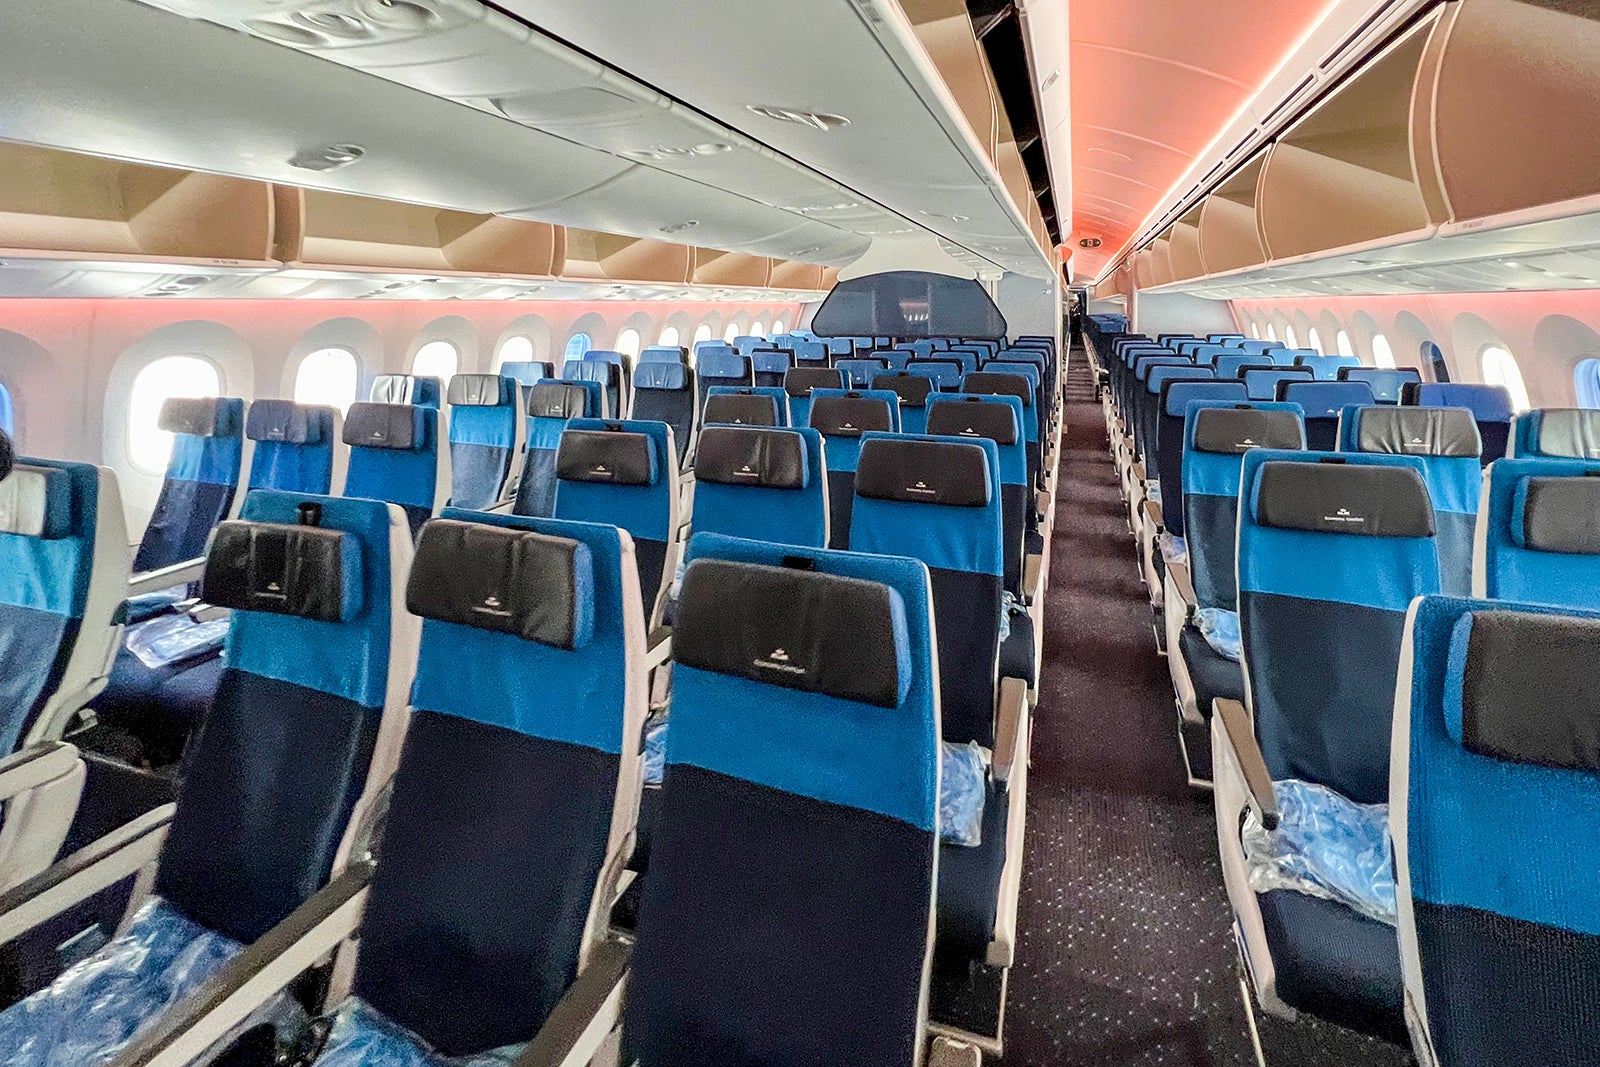 KLM plane interior in Amsterdam in 2023. CLINT HENDERSON/THE POINTS GUY